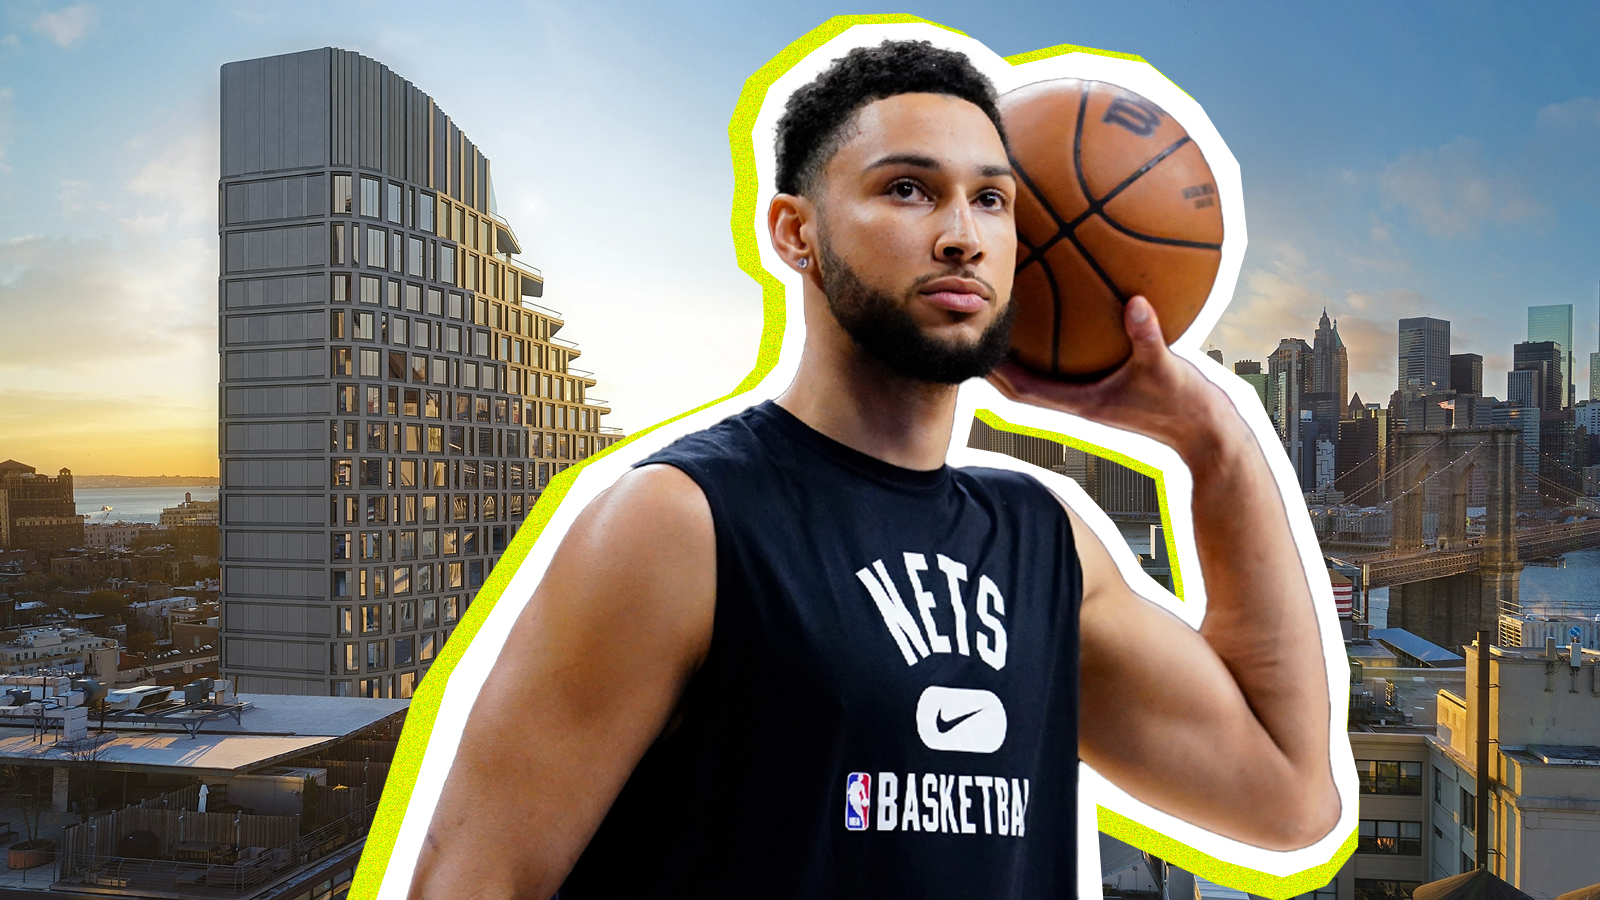 Ben Simmons Secures The Bag With Luxurious Louis Vuitton Luggage - DMARGE